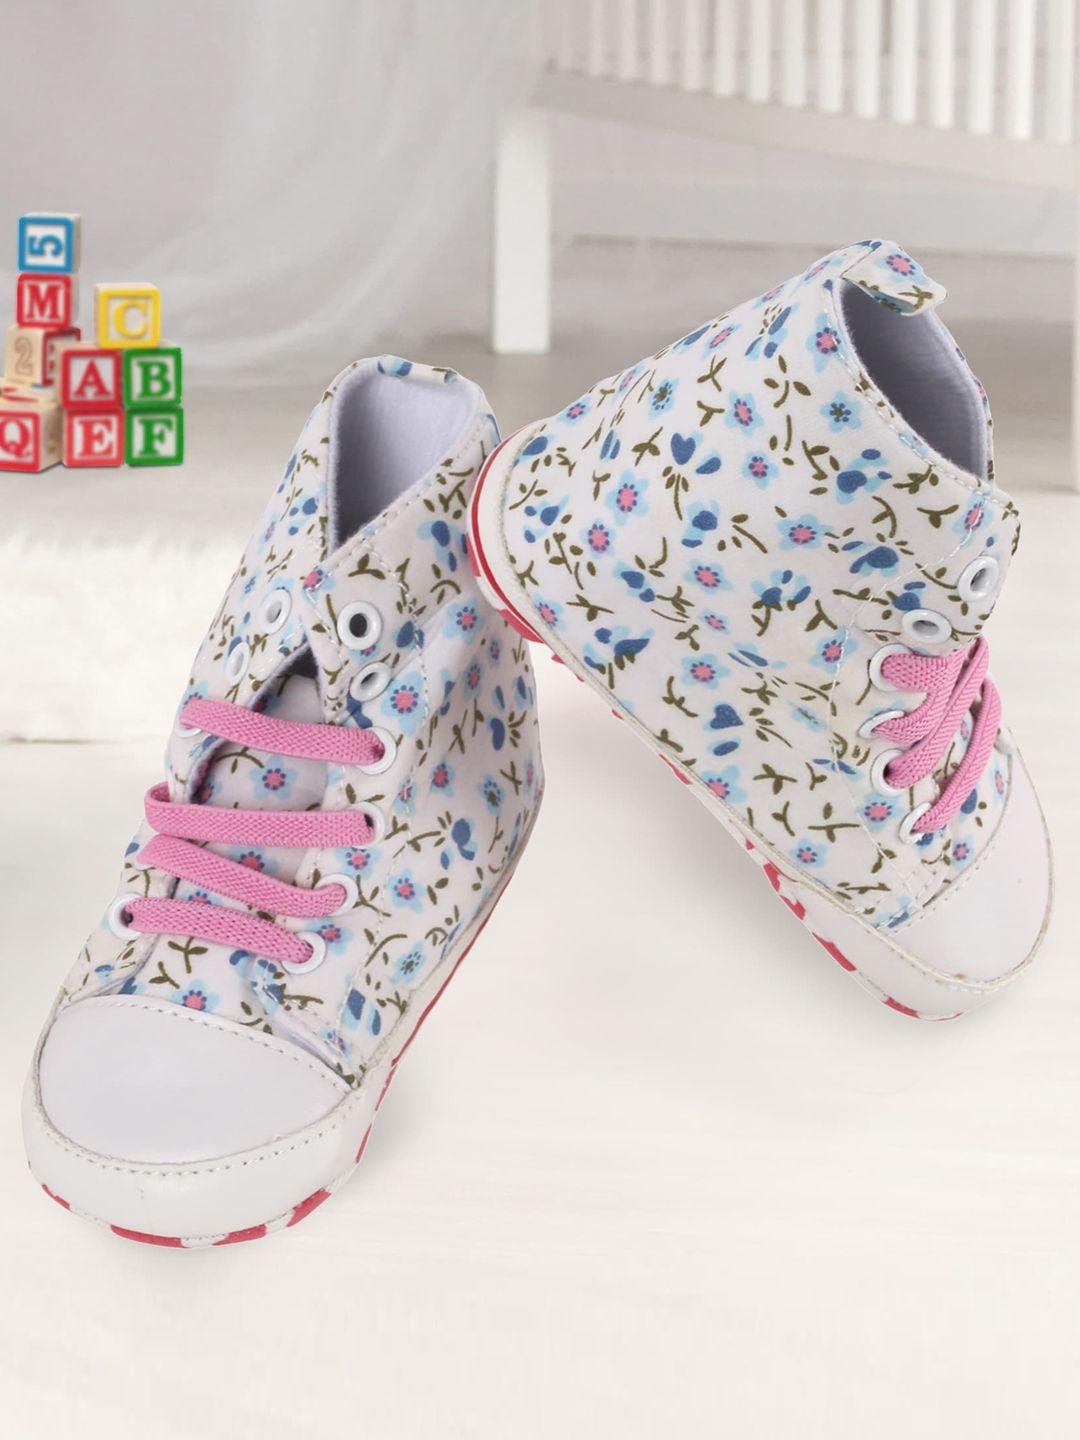 baby moo girls white & pink floral printed high top booties